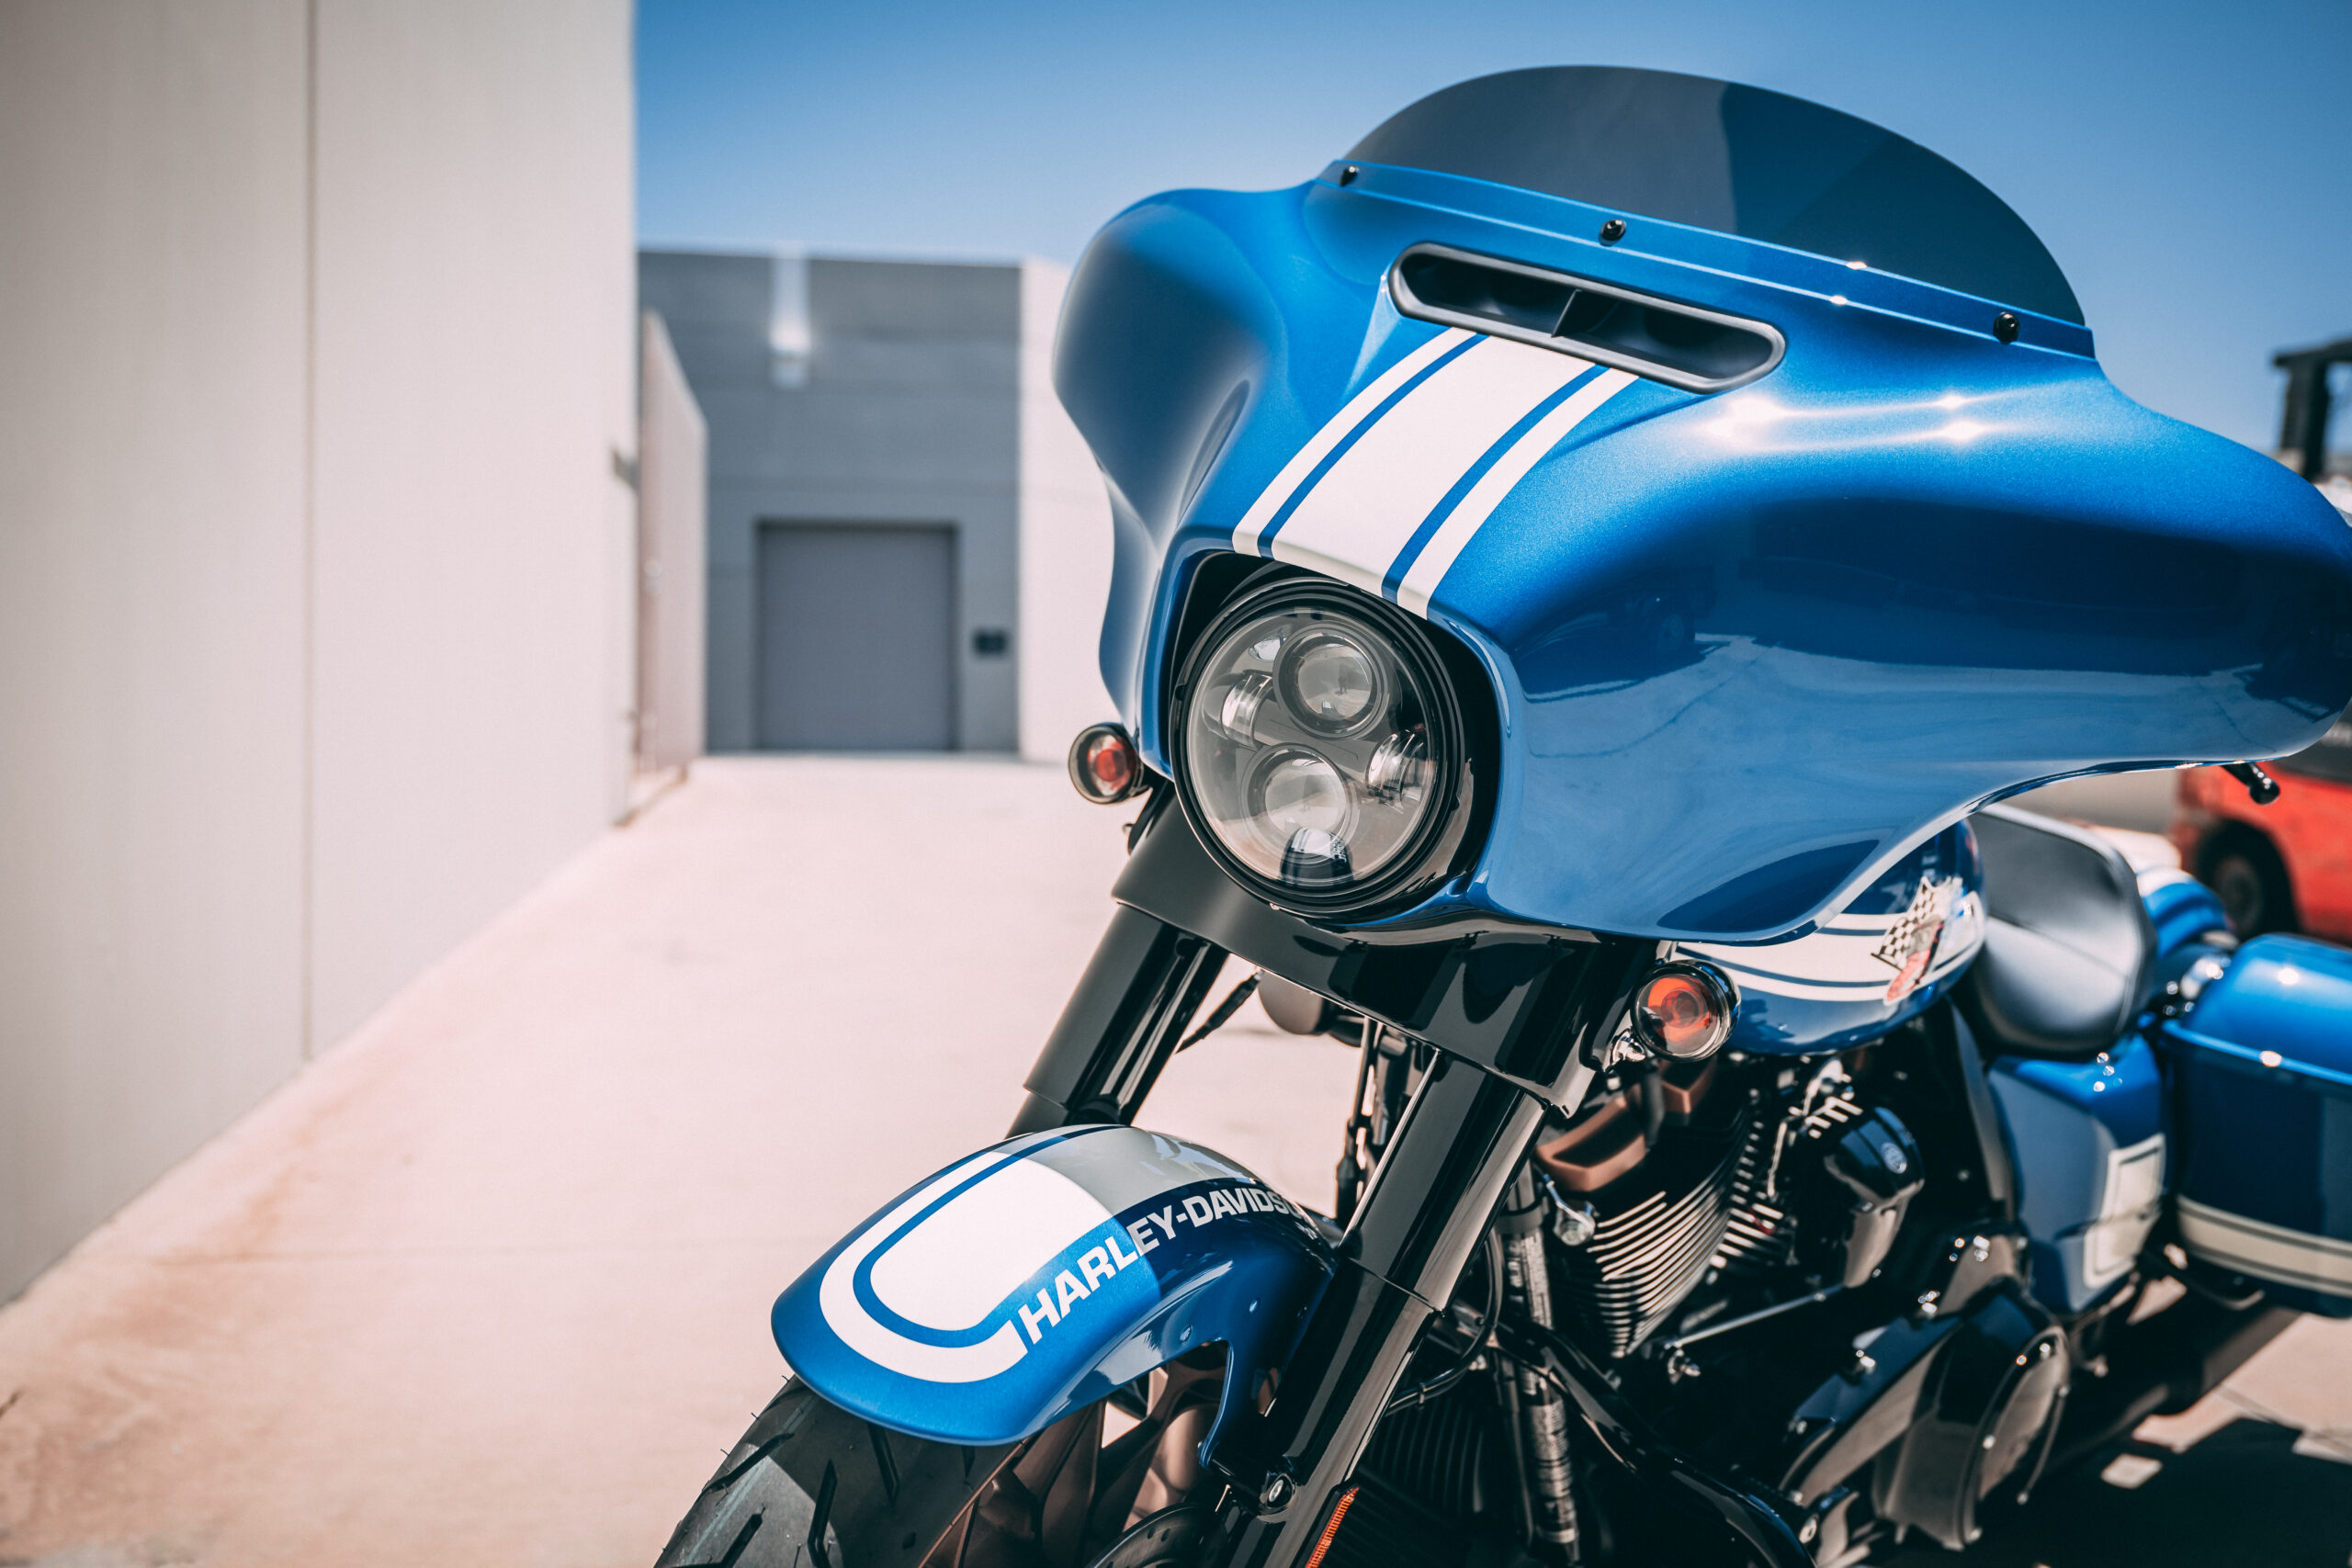 The Street Glide ST Fast Johnny: The Performance Bagger You Need